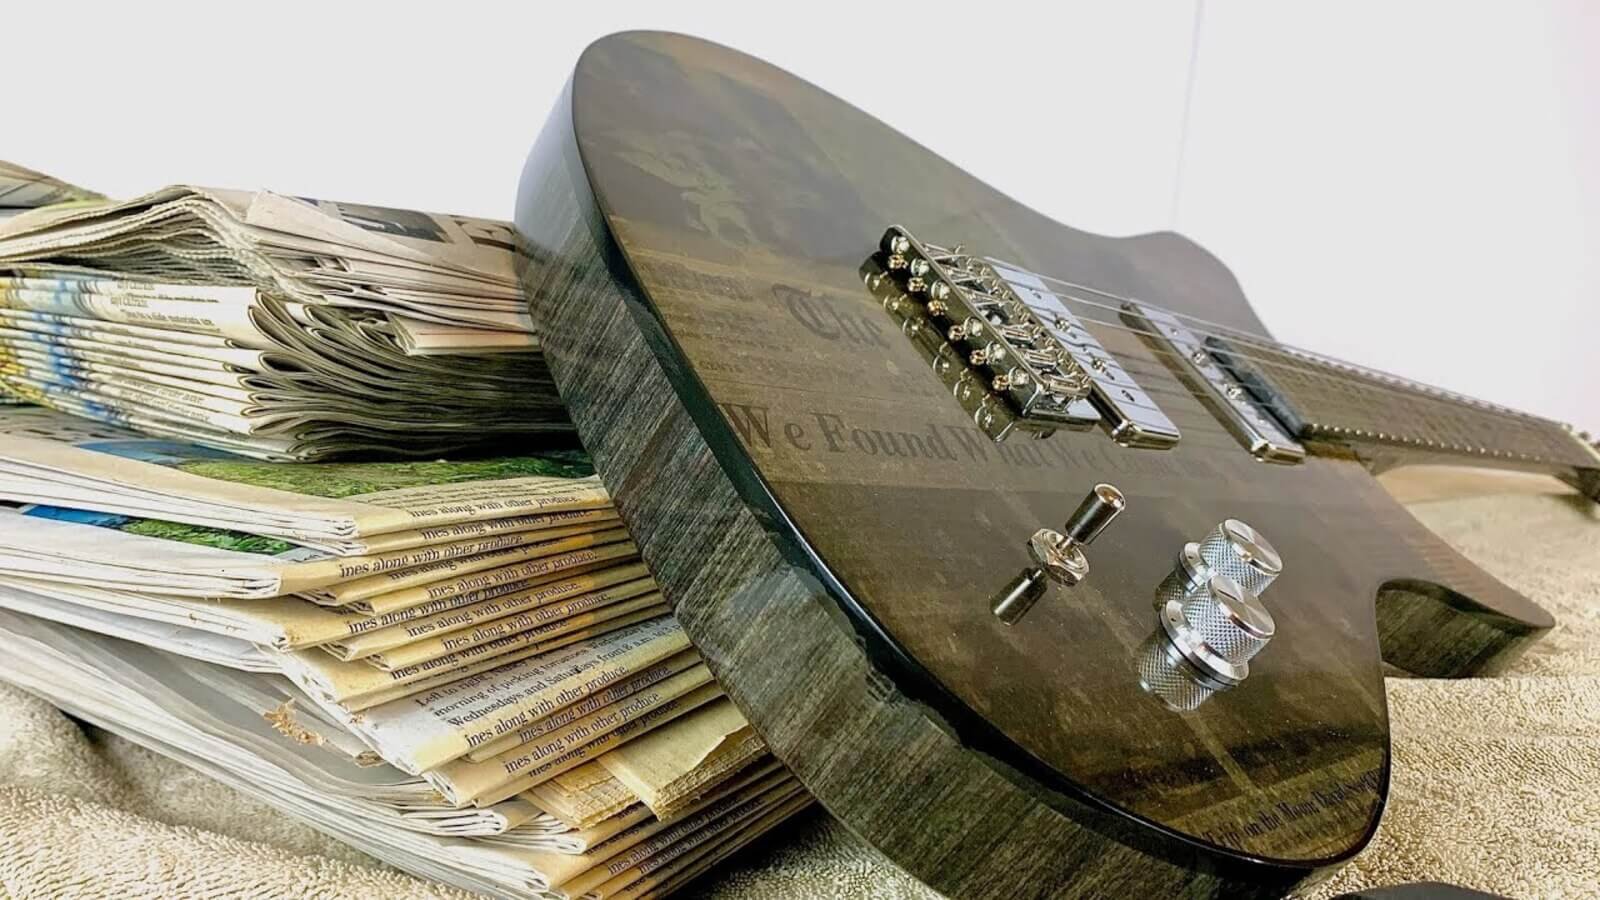 Famous YouTuber Build a Guitar Out of 1,000 Aluminum Bottles